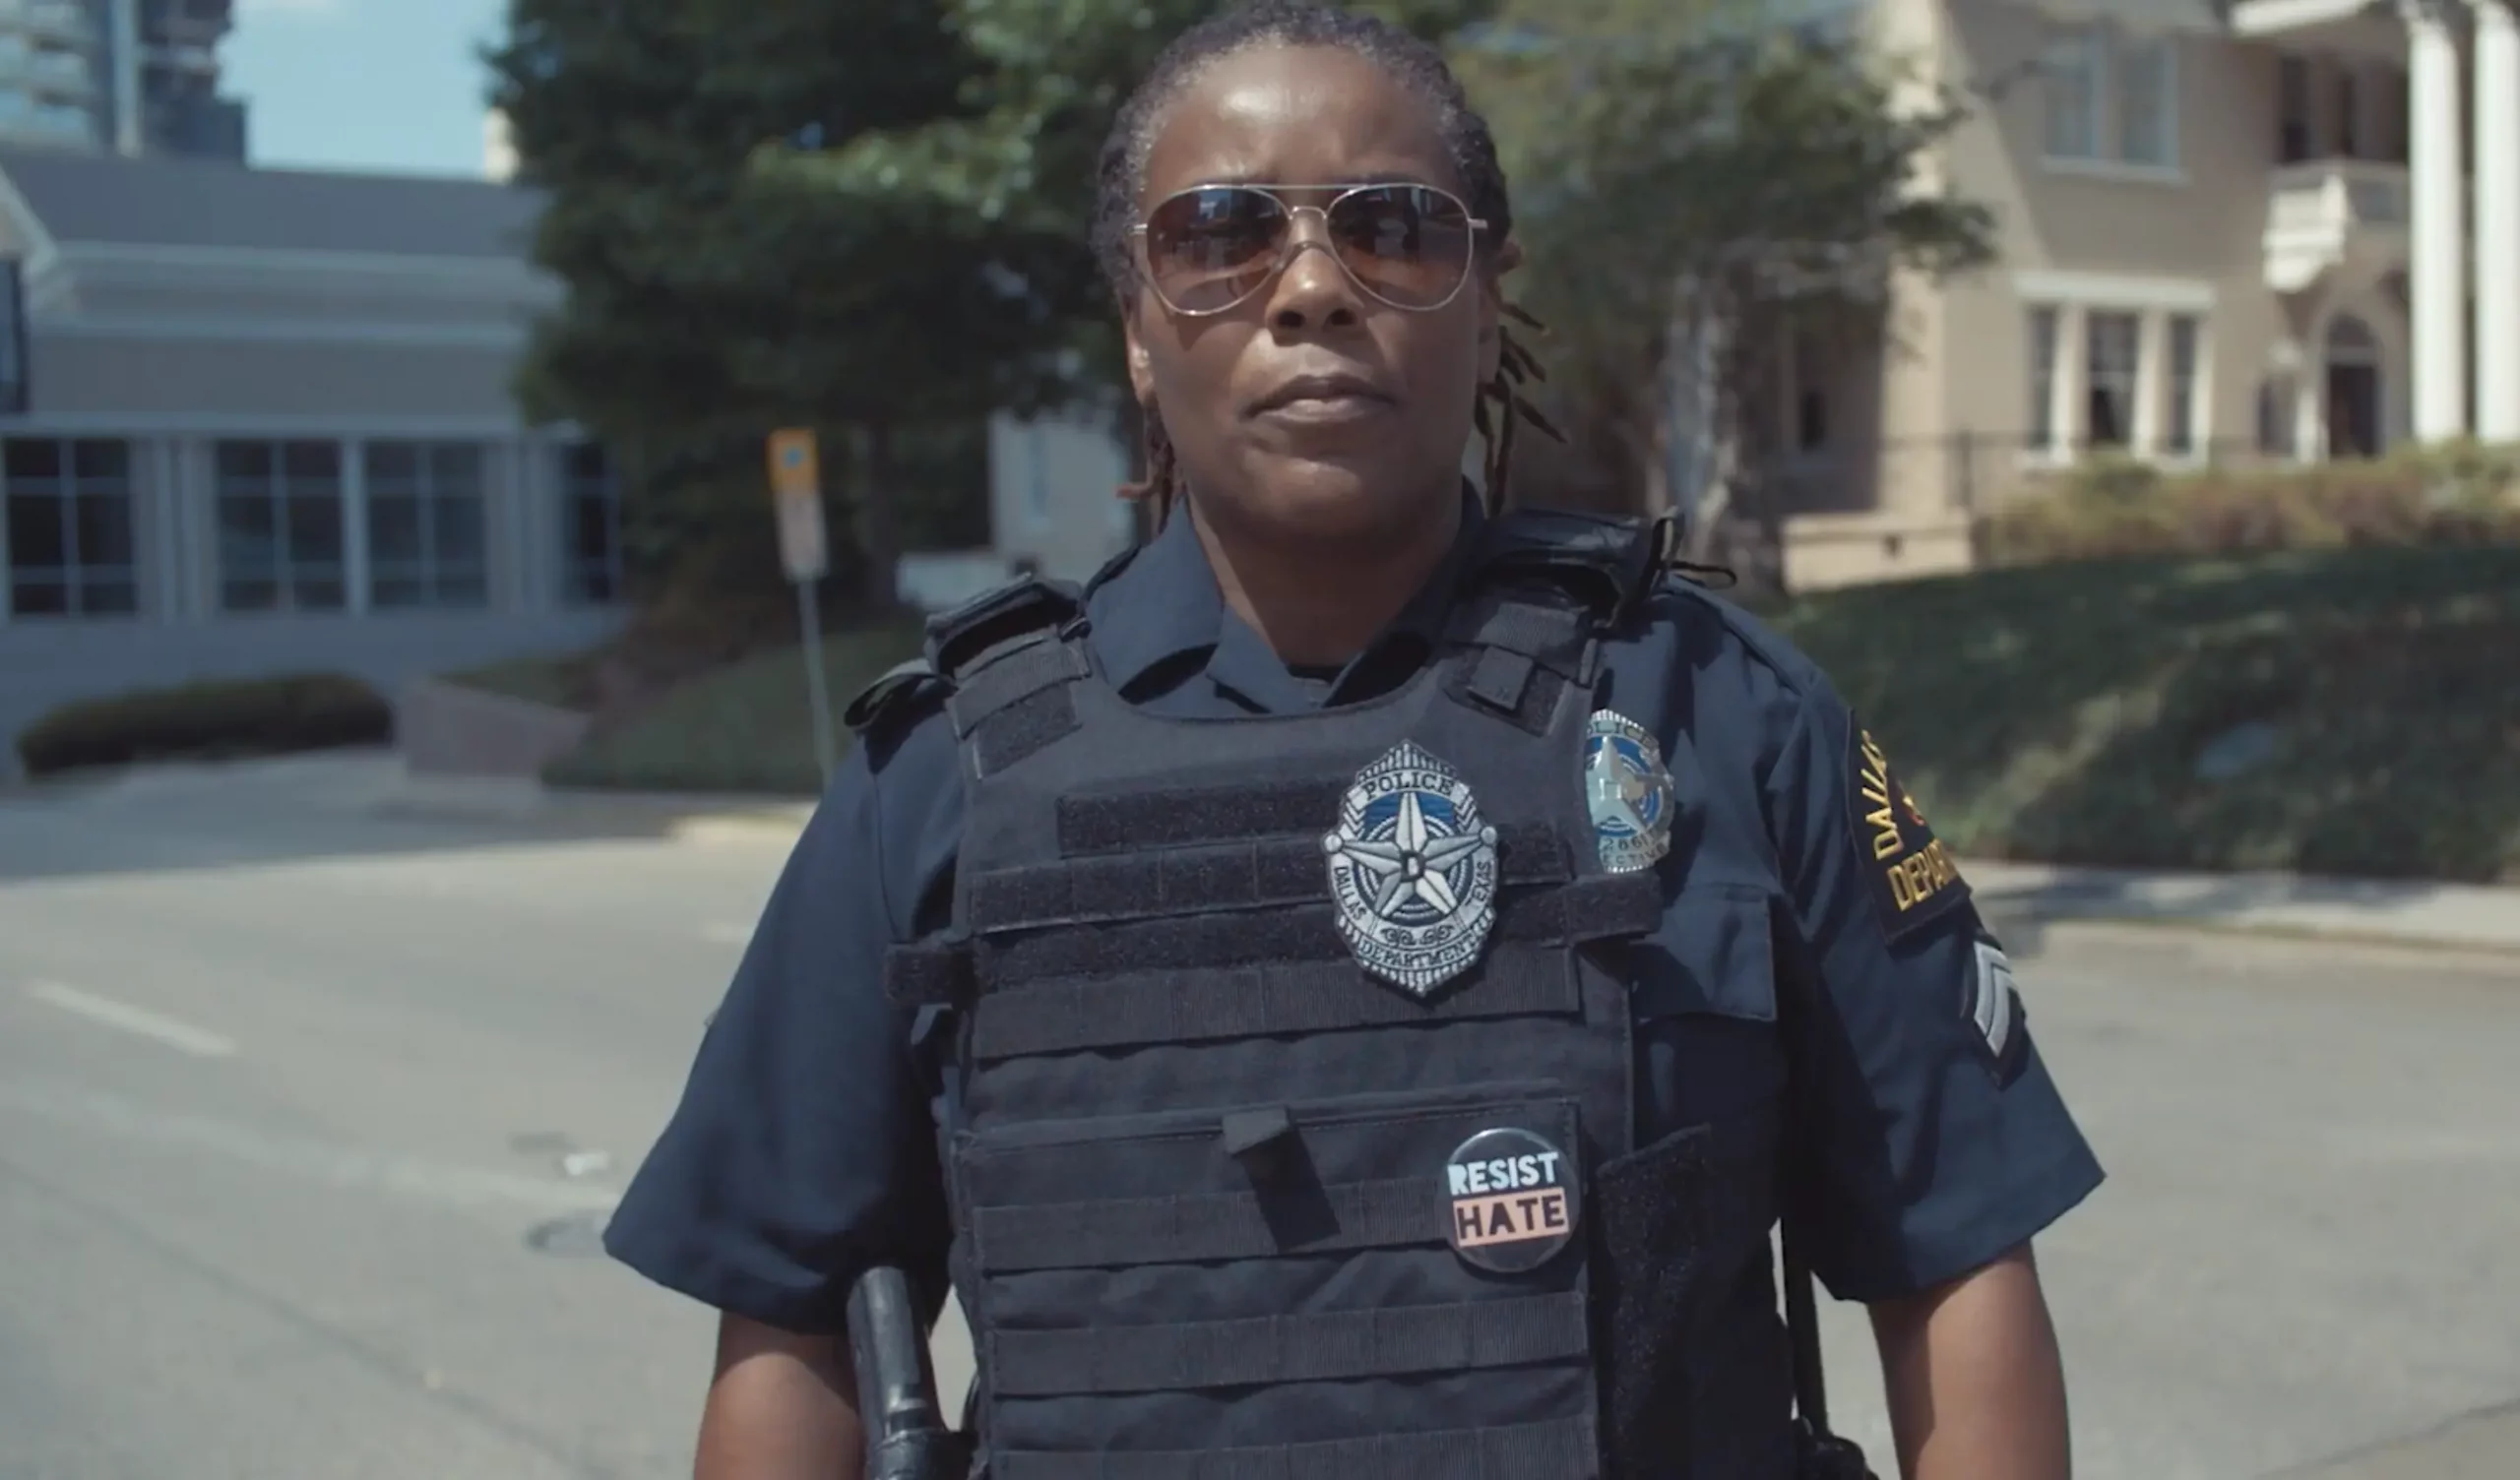 A police officer standing on the street during a photo shoot for a nonprofit video.